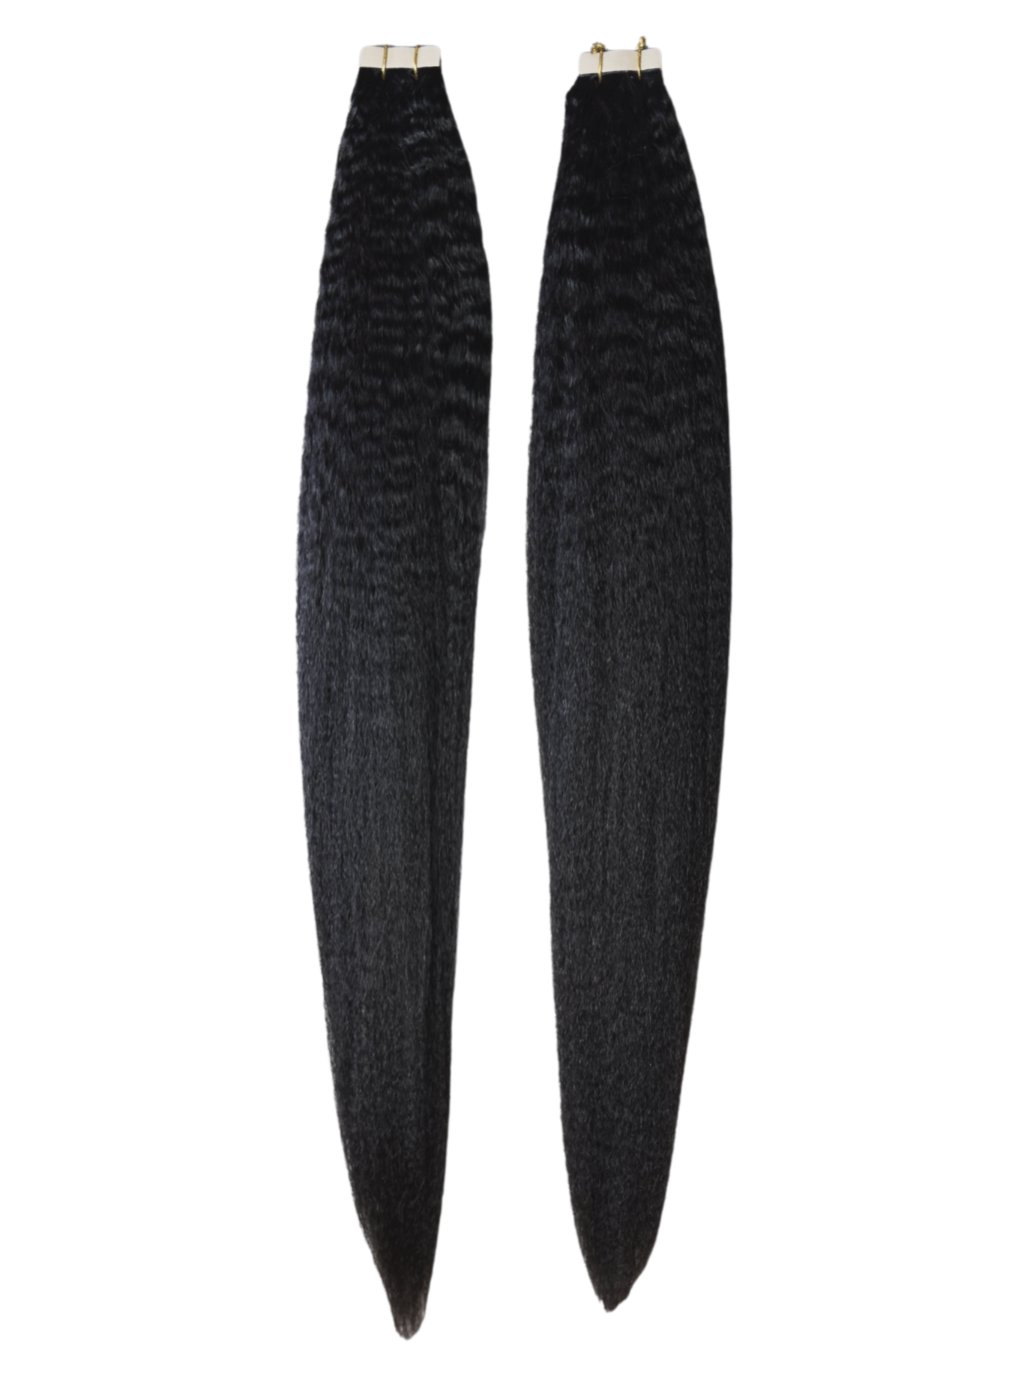 1B/Natural Black Kinky Straight Tape-In Extensions